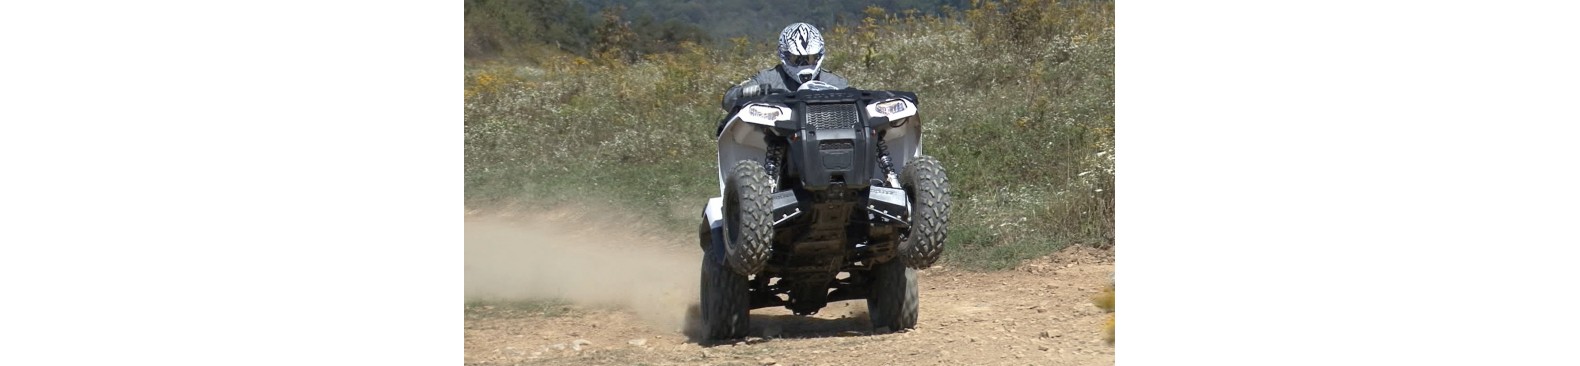 Parts and Performance for Polaris ATVs